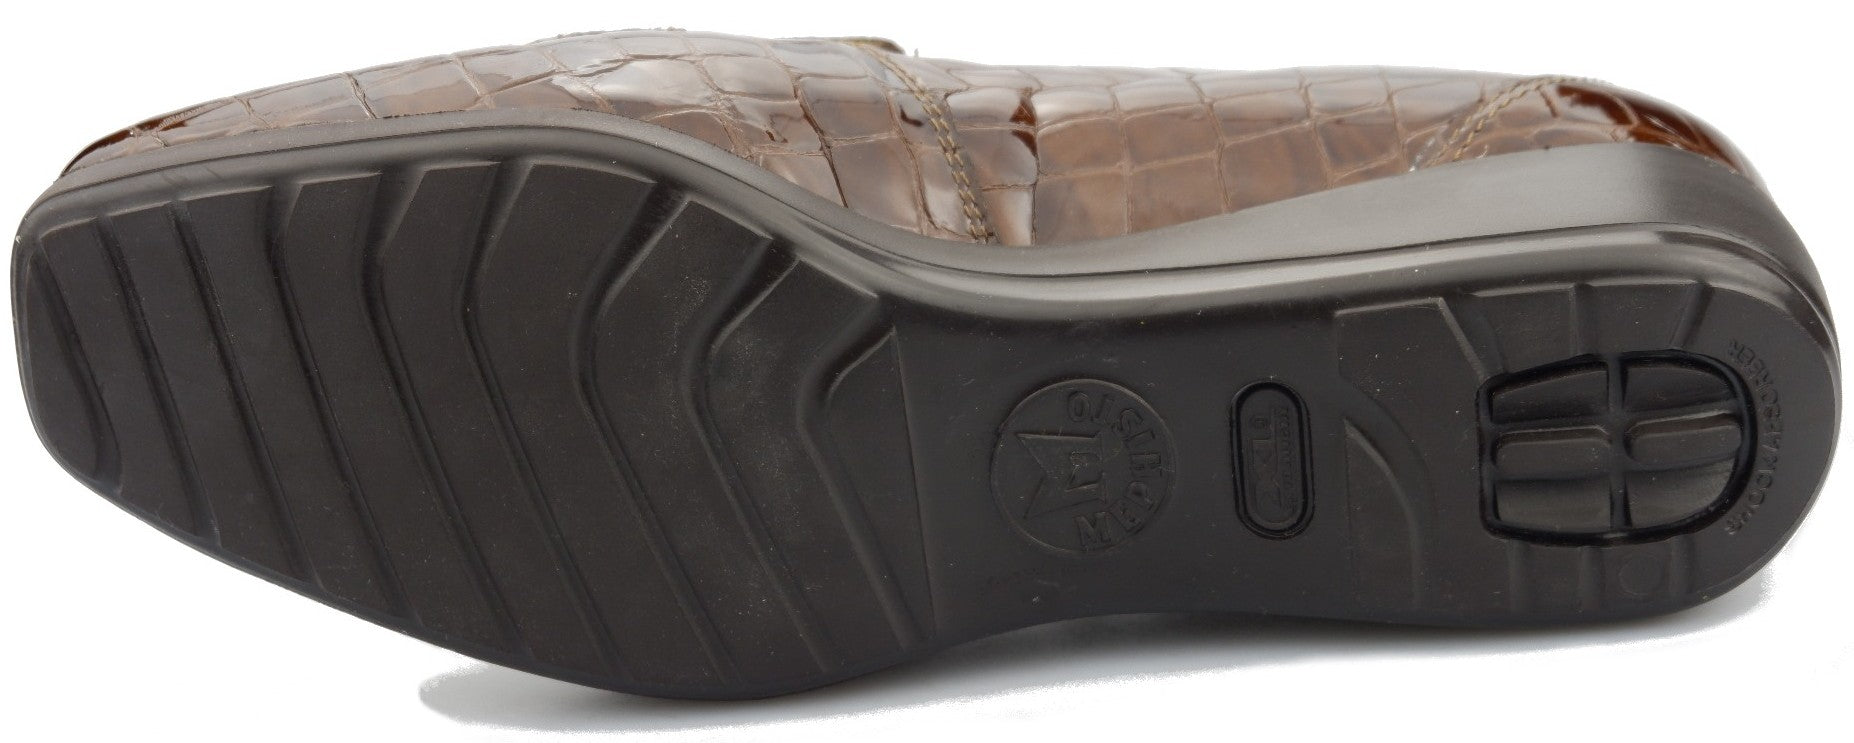 'CELKA' women's loafer - Brown croco patent - Chaplinshoes'CELKA' women's loafer - Brown croco patentMephisto